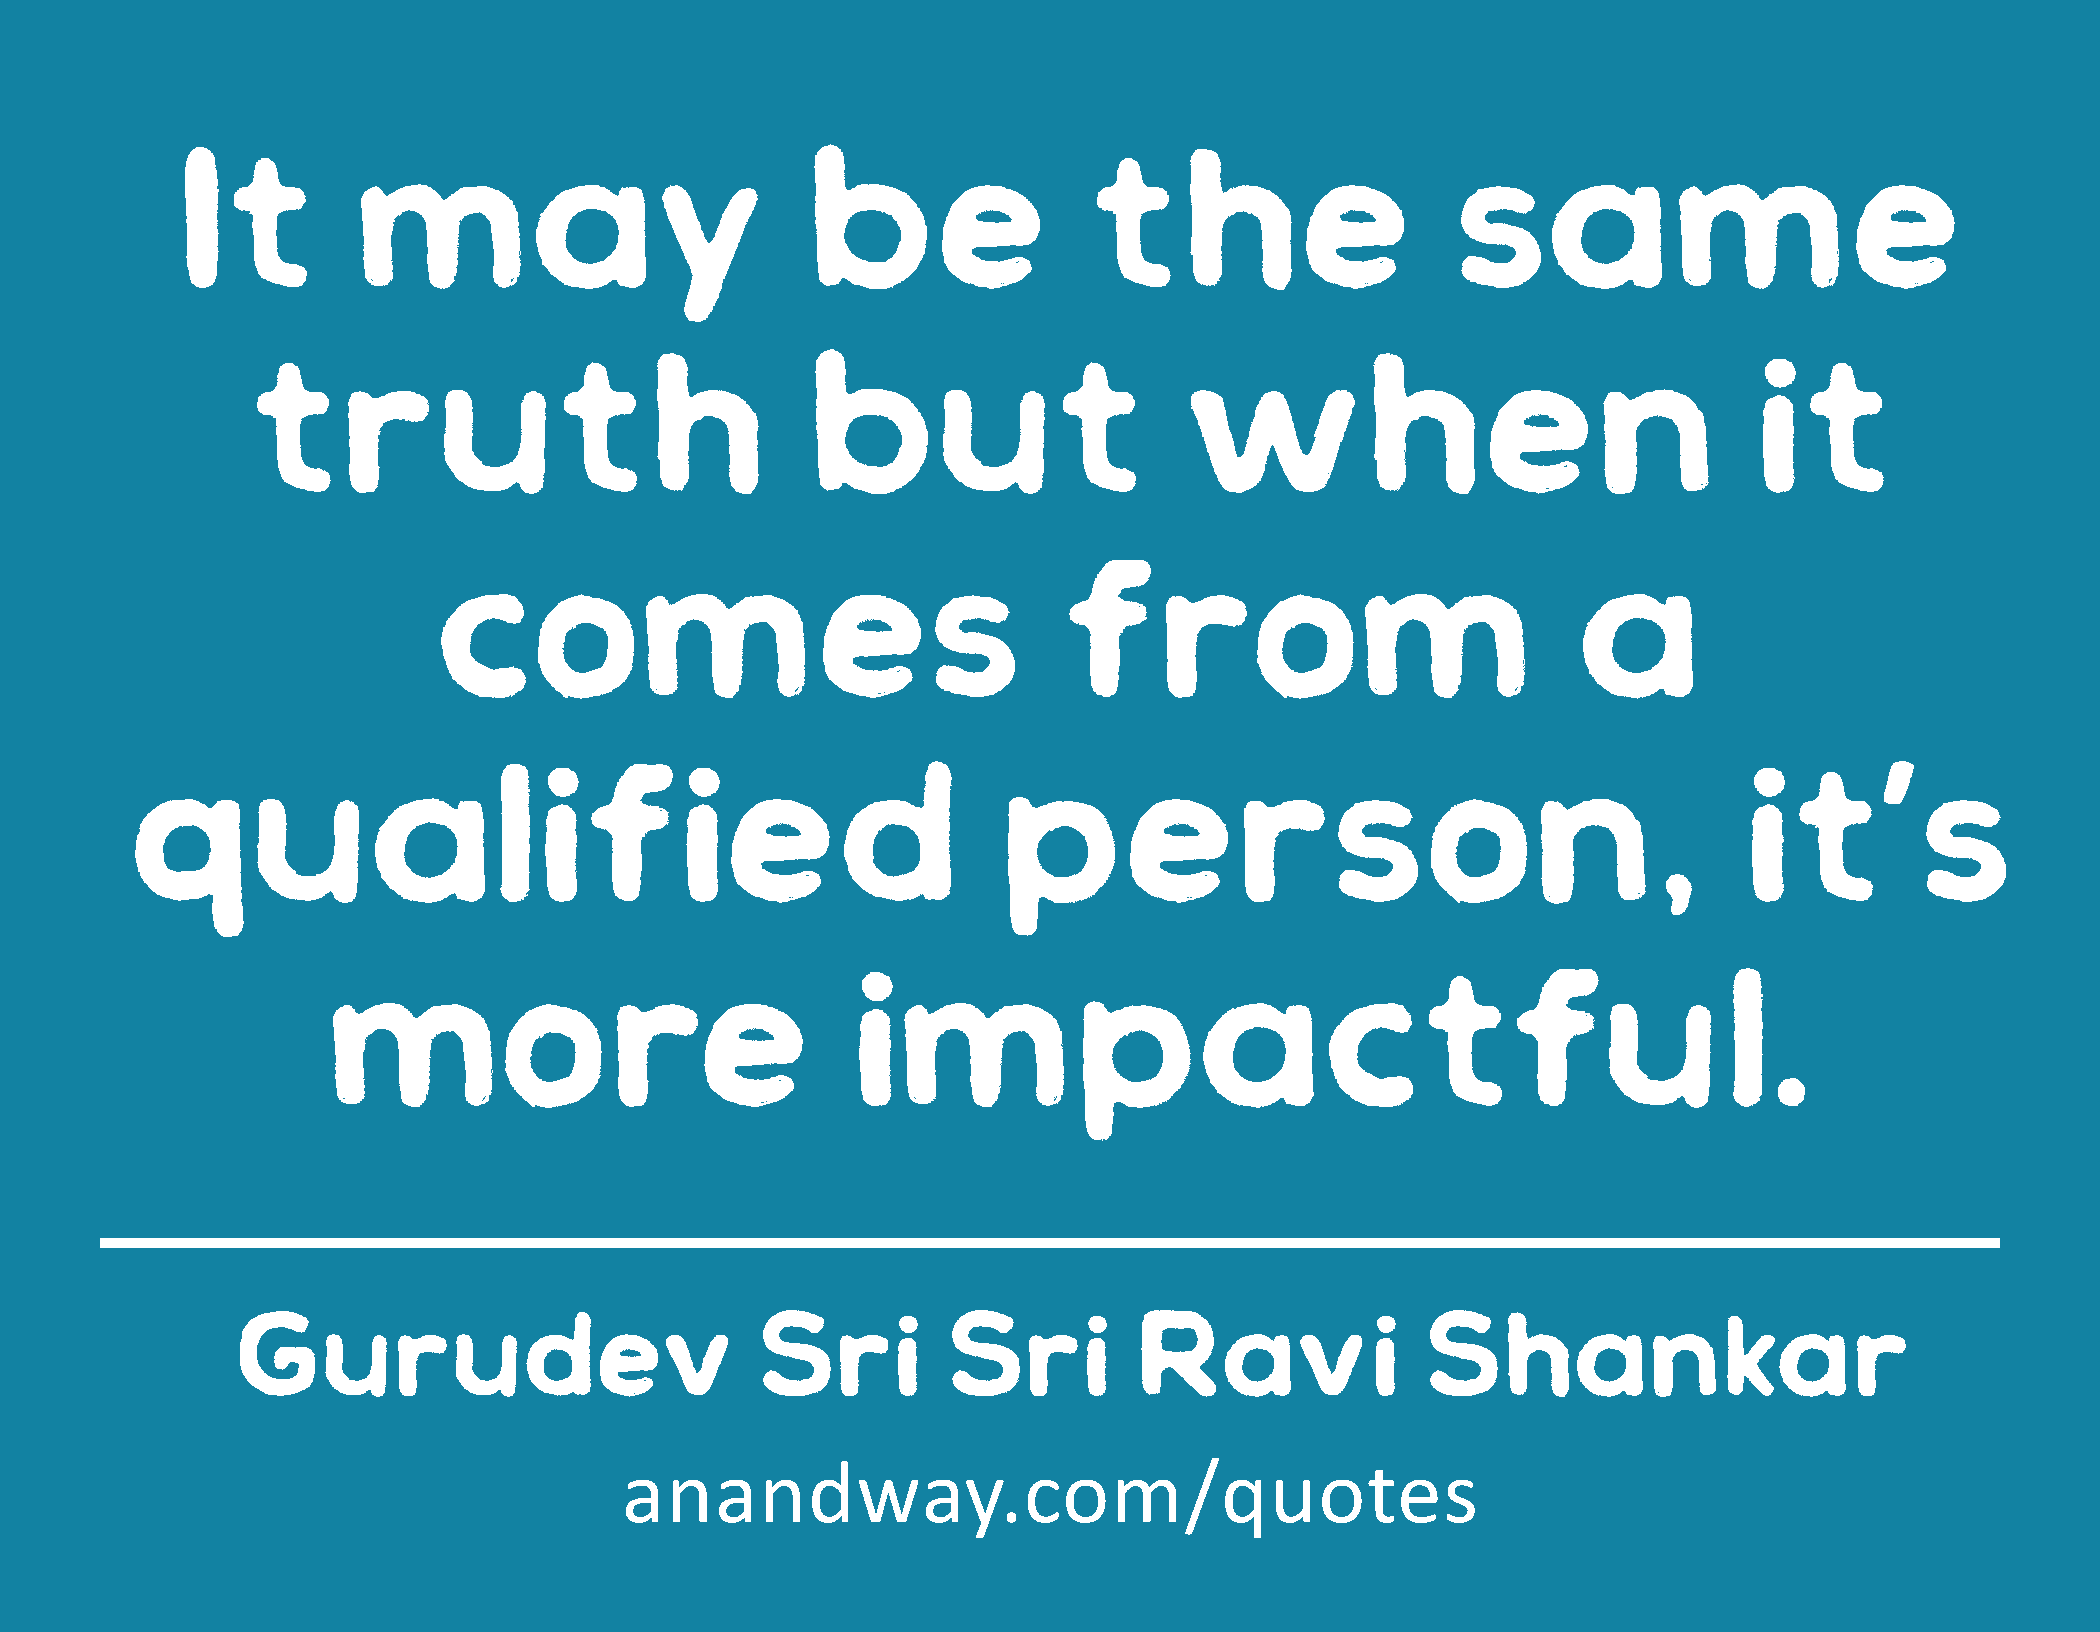 It may be the same truth but when it comes from a qualified person, it’s more impactful. 
 -Gurudev Sri Sri Ravi Shankar